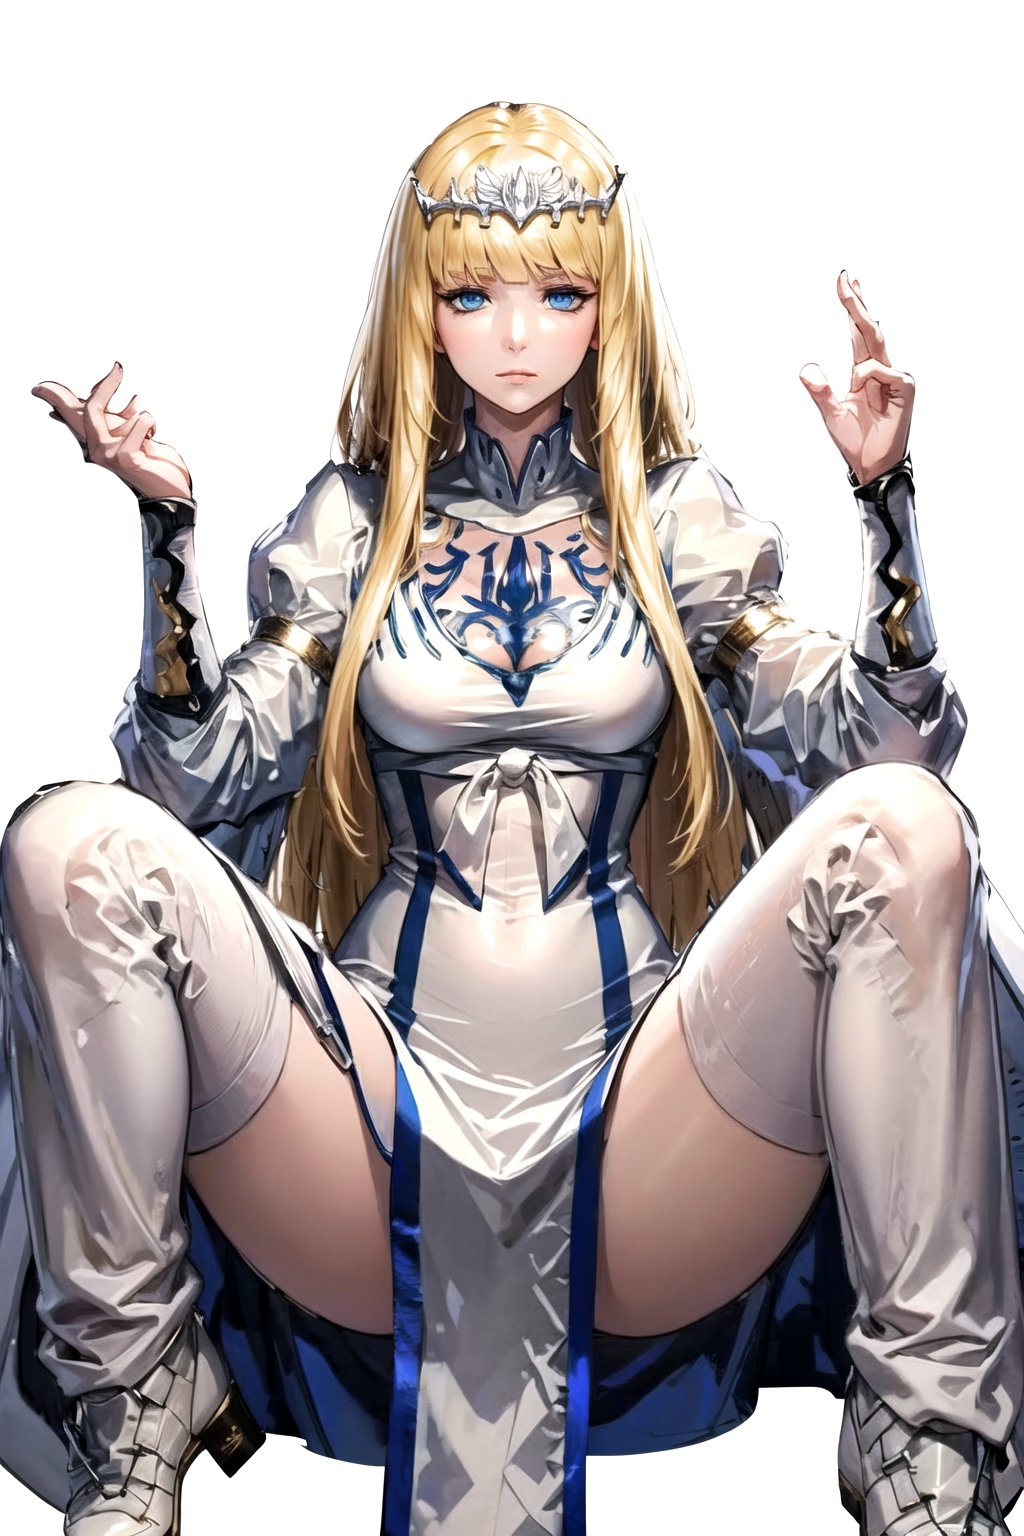 //Quality,
masterpiece, best quality
,//Character,
1girl, solo
,//Fashion, 
,//Background,
white_background
,//Others,
,spread legs, 
Calca, blonde hair, long hair, white tiara, white dress, blue eyes